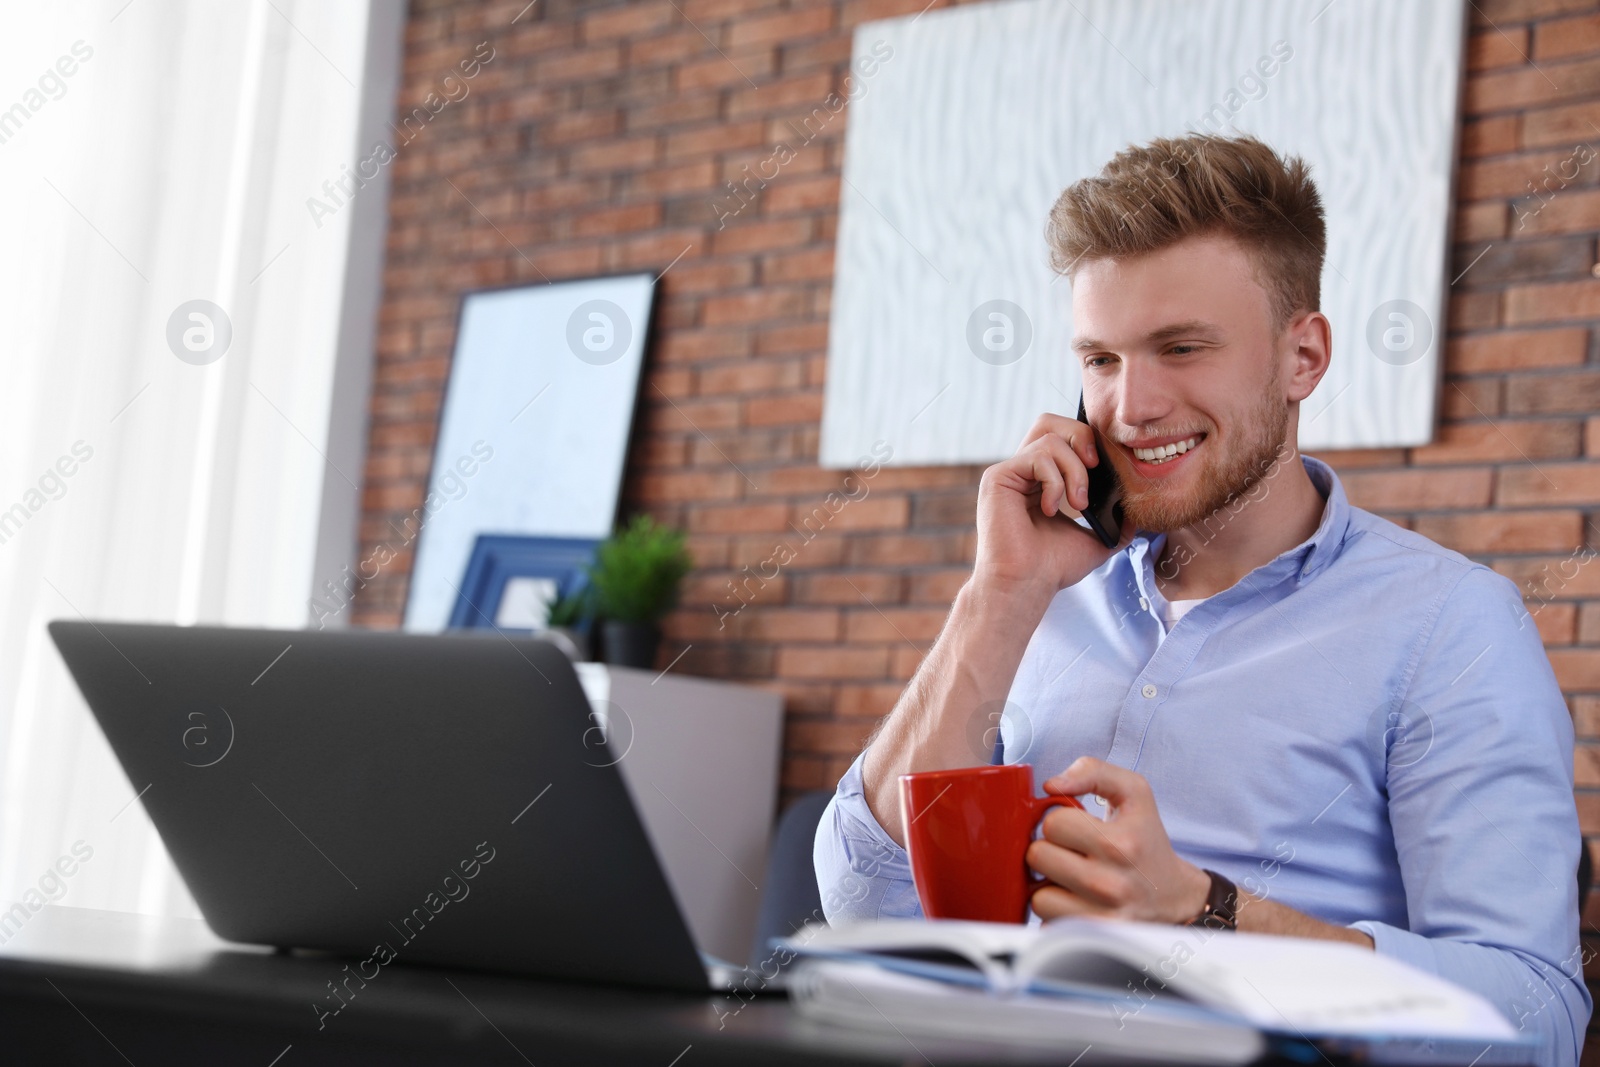 Photo of Young man talking on phone while using laptop at table indoors